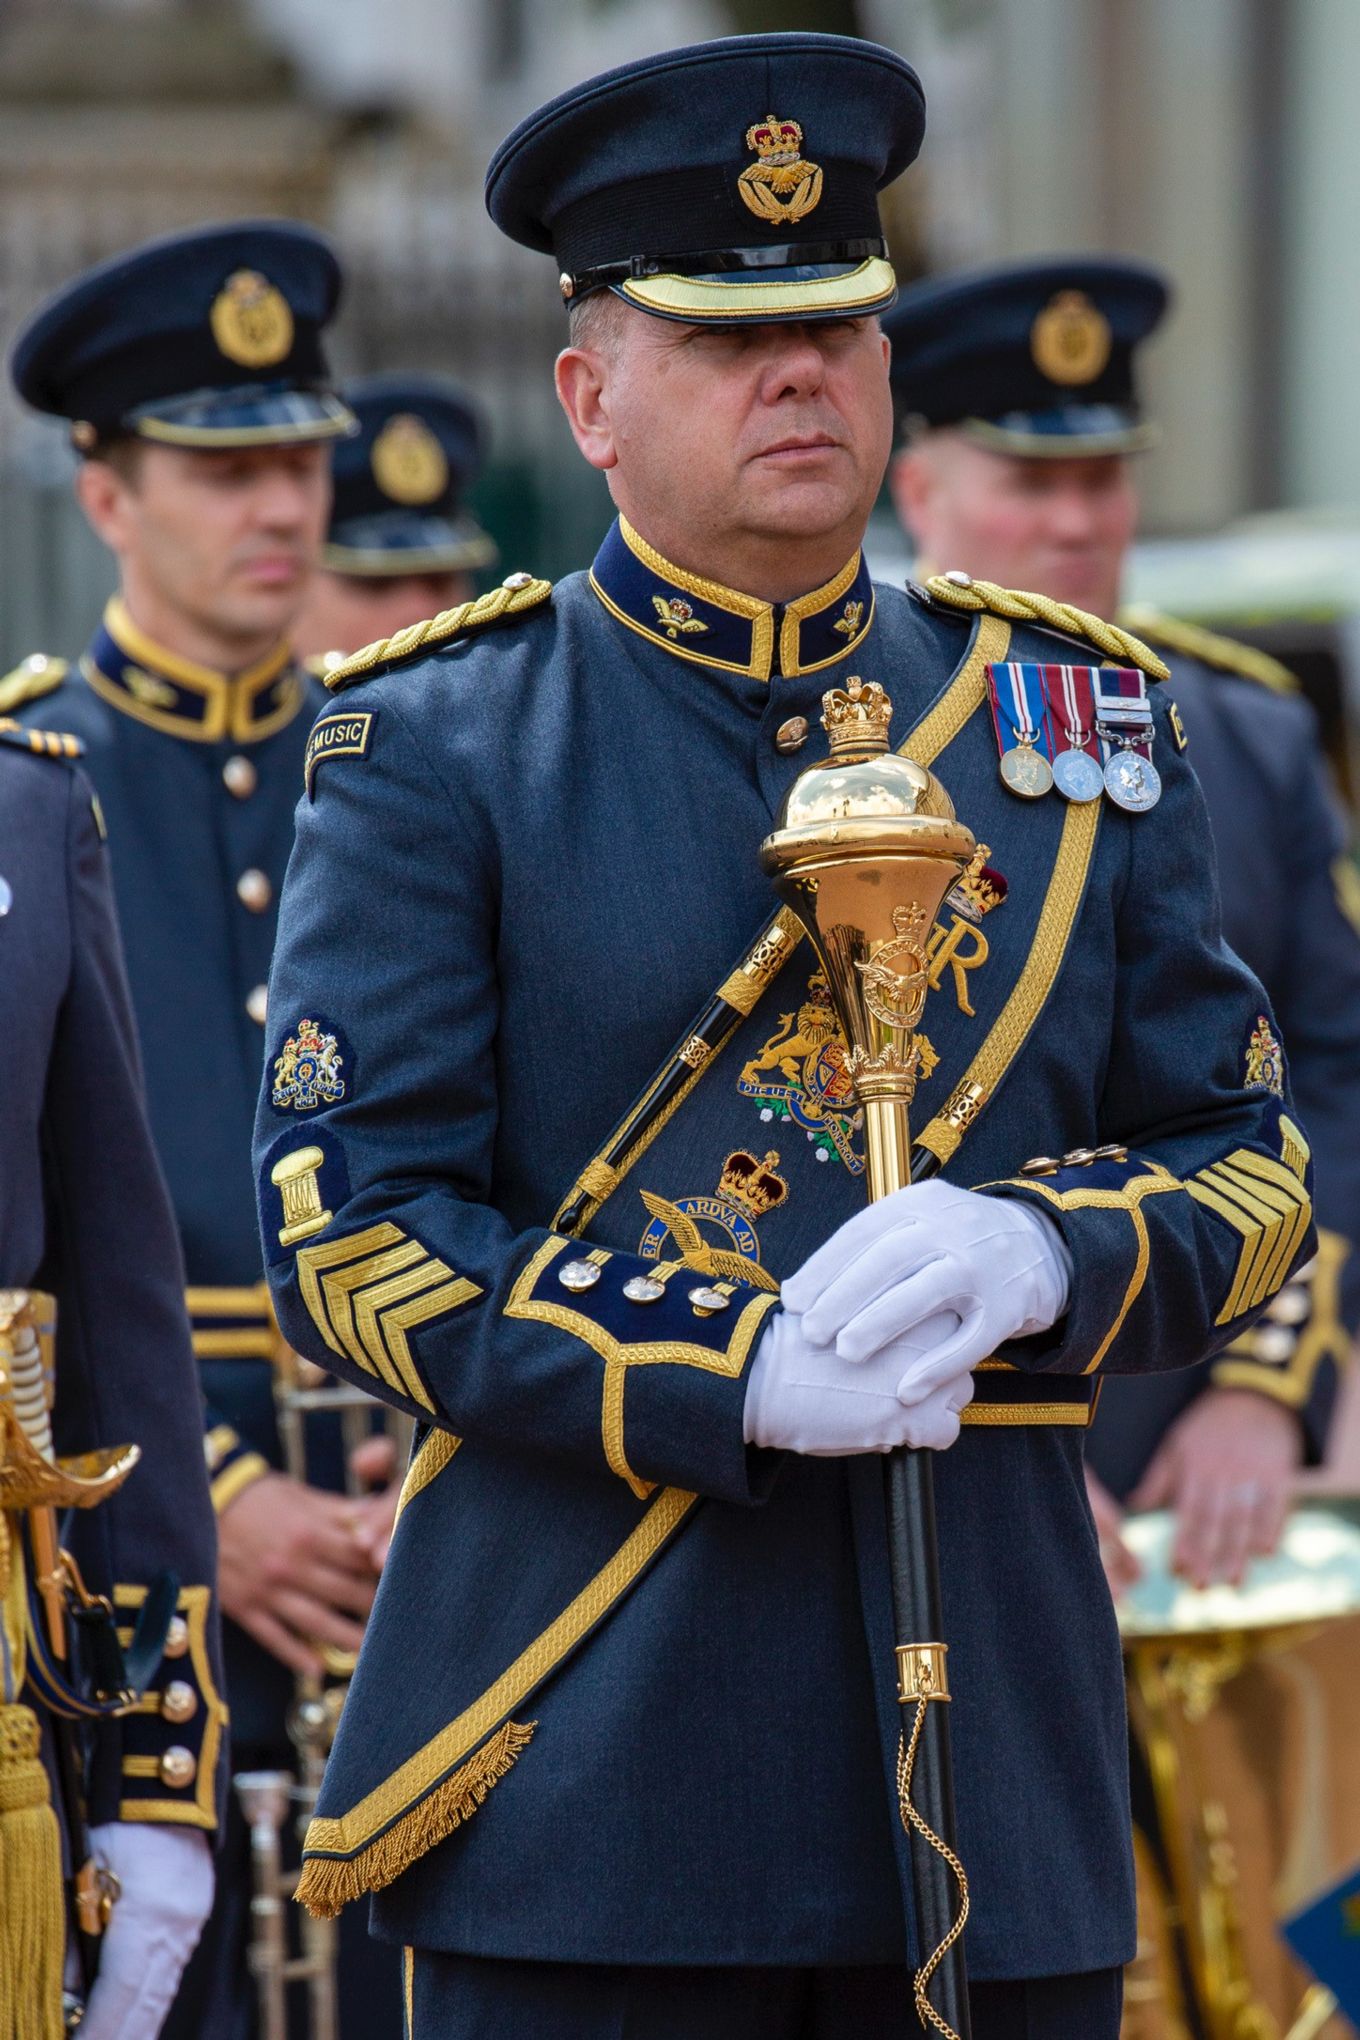 RAF Drum Major with his mace.